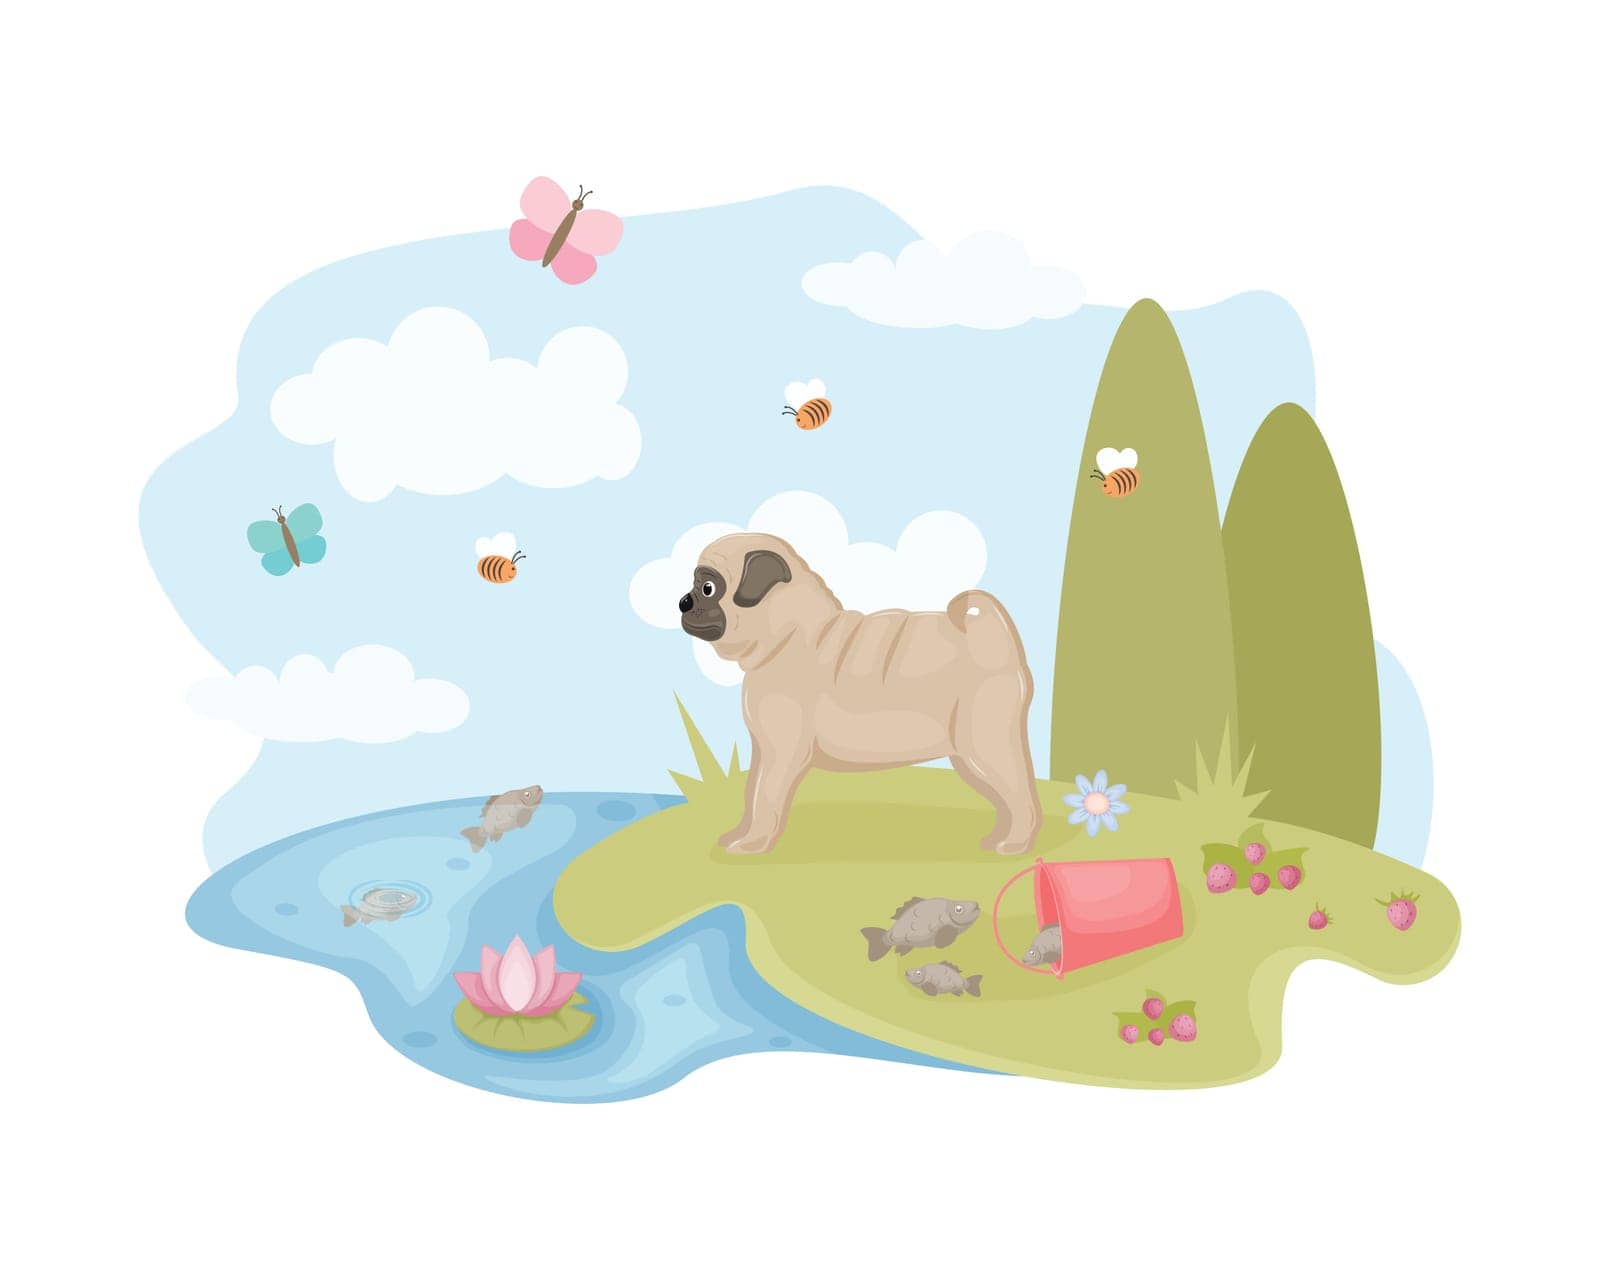 Pug. Cute cartoon-style pug stands near the lake, butterflies and bees fly around it. Pug in nature. Vector illustration by NastyaN